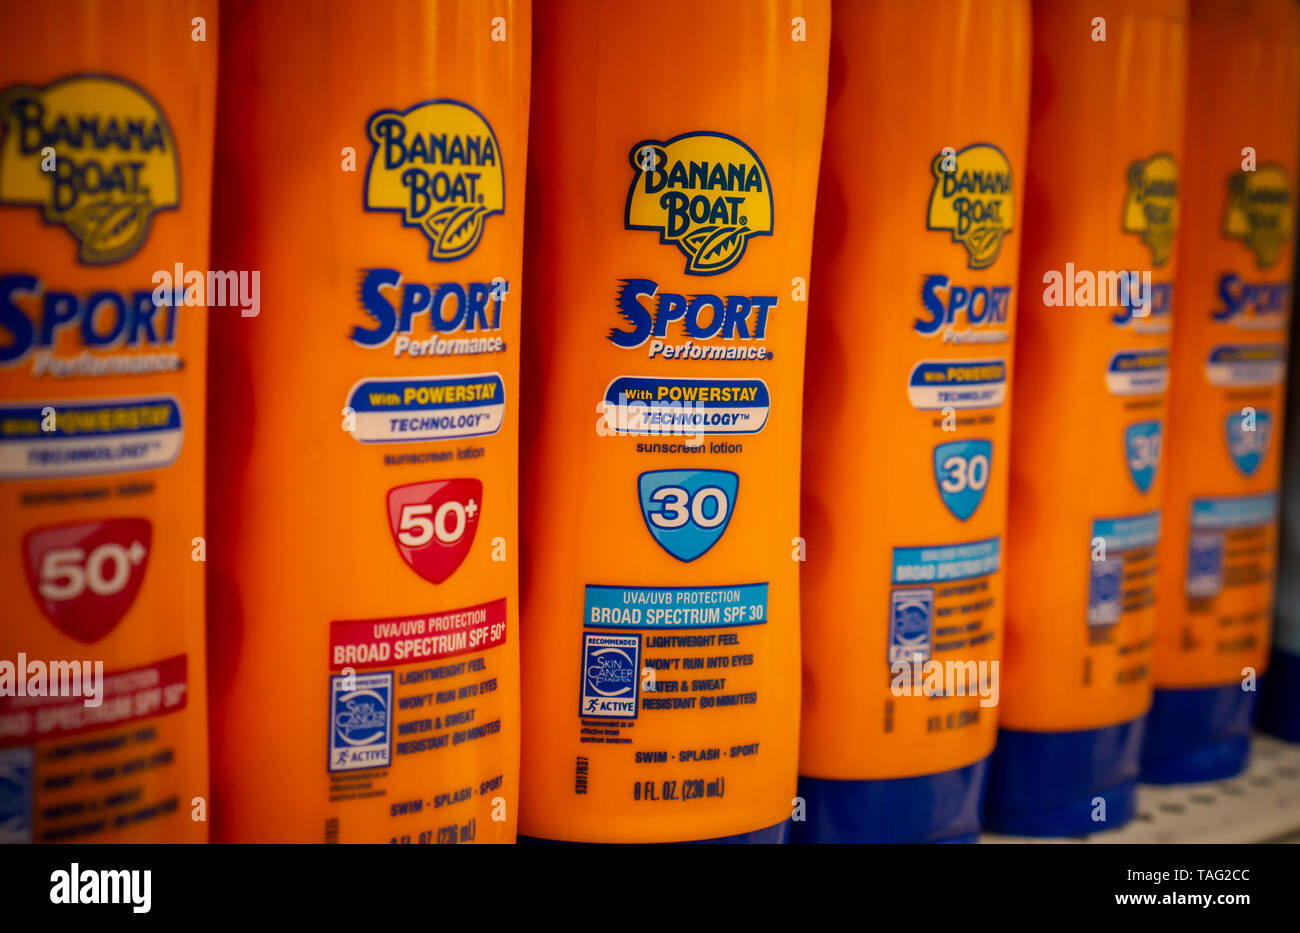 Bottles of Banana Boat brand sunscreen are seen on a department store shelf in New York on Saturday, May 18, 2019. The unofficial beginning of summer arrives on the Memorial Day weekend at the end of May. (© Richard B. Levine) Stock Photo